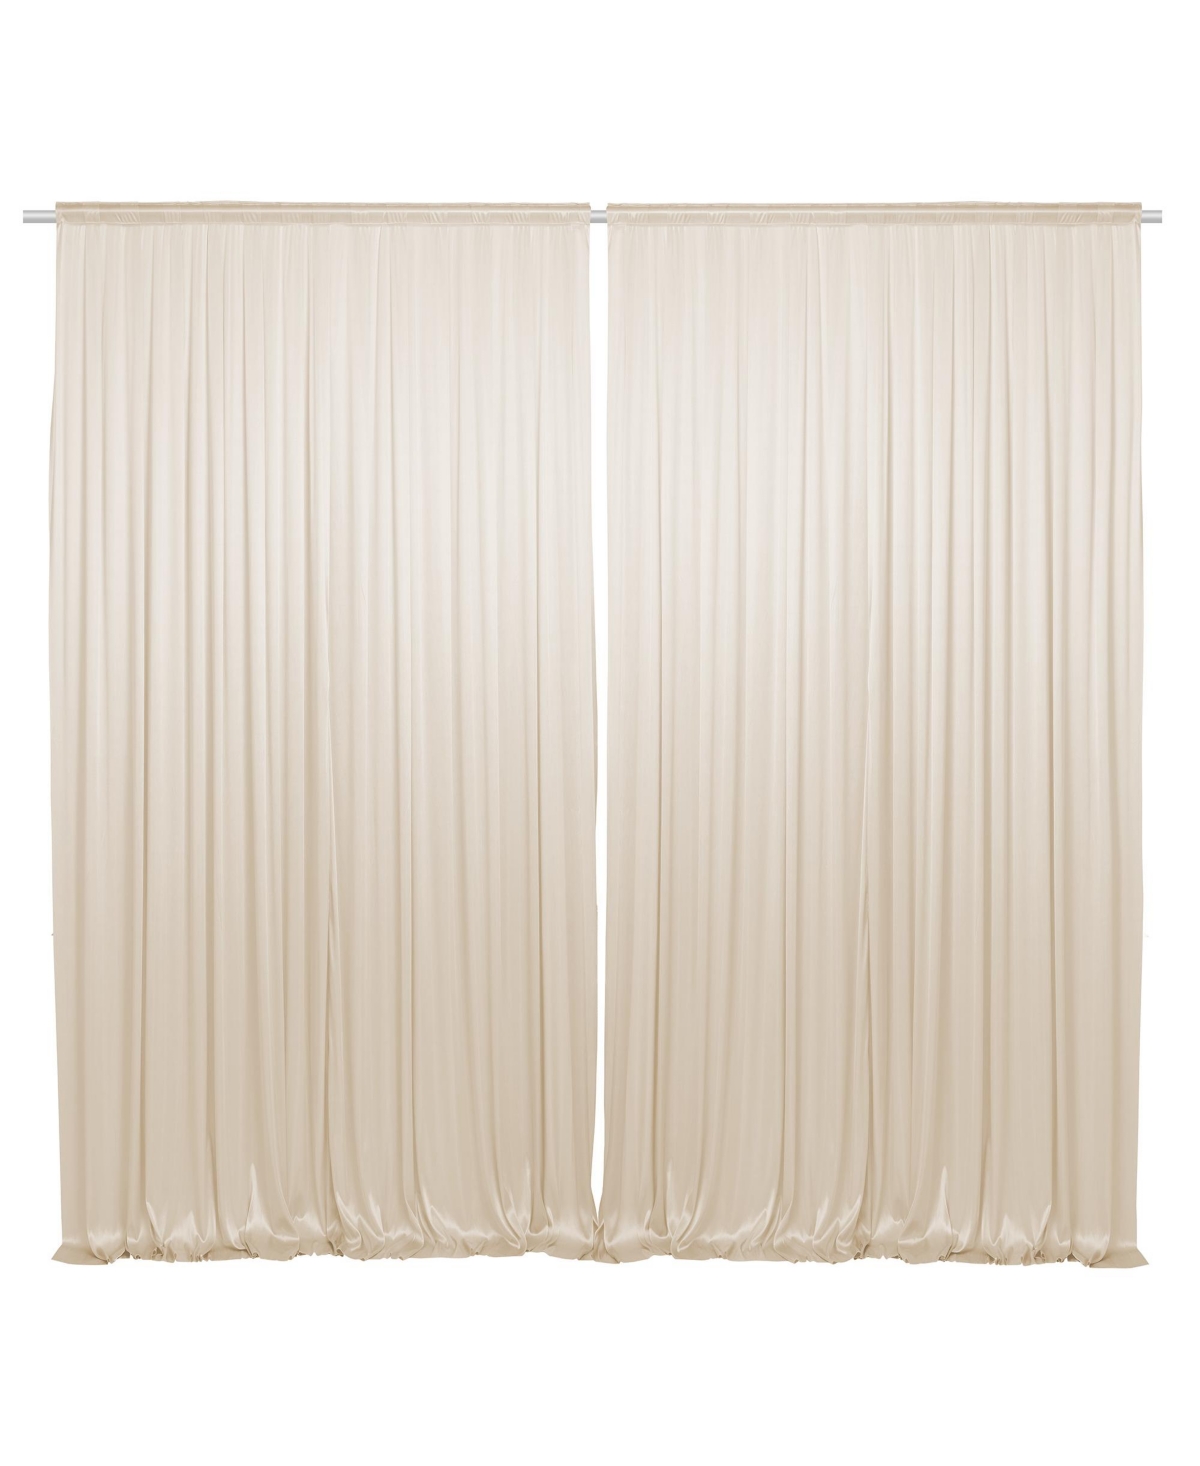 Set of 2 Photography Backdrop Curtains, 5ft x 10ft Ivory Wedding Photo Background - Open miscellaneous